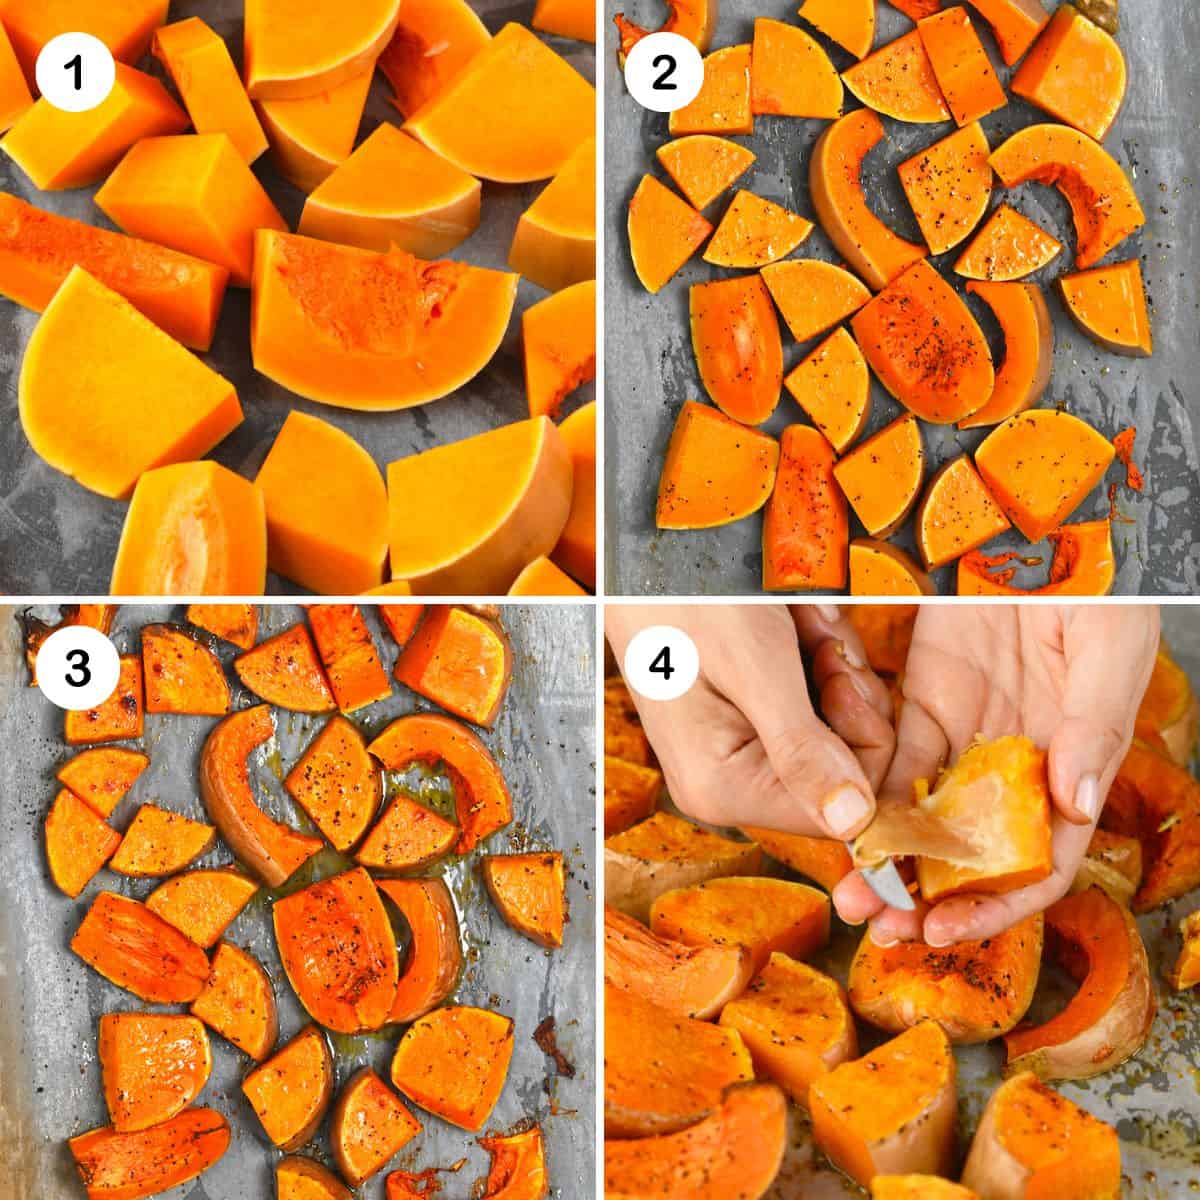 Steps for roasting and peeling butternut squash